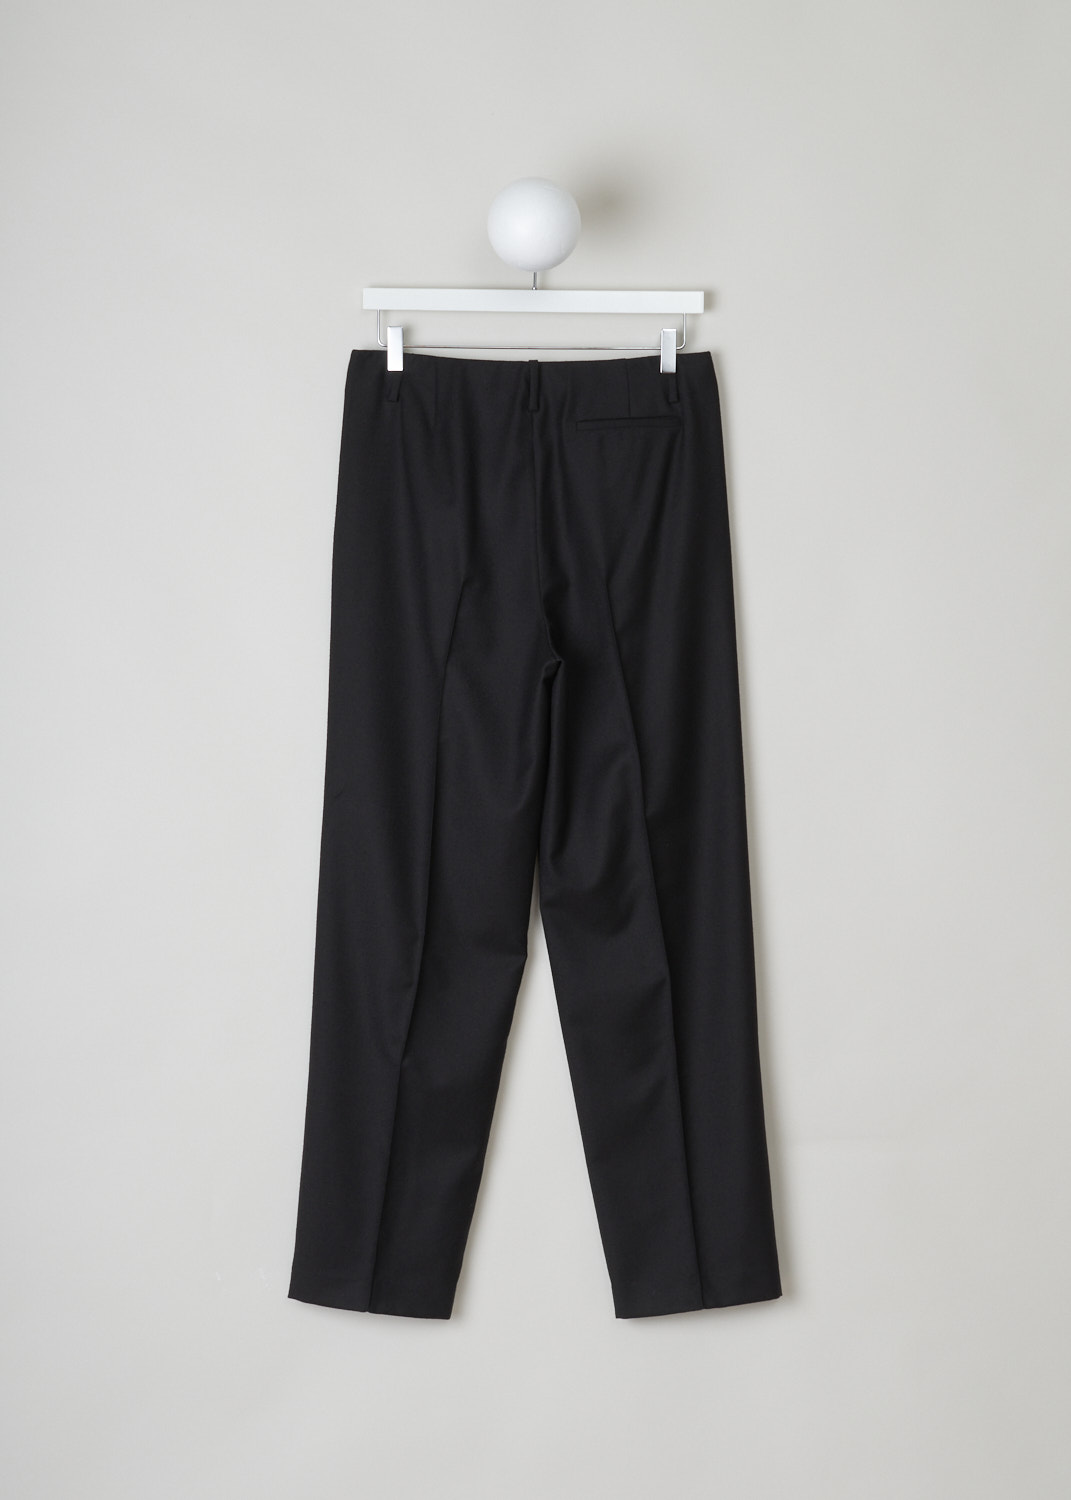 The Row, Double pleated black pants, firth_pant_3644W959_ebony, black, back, One of those must have basics, being this black pants. What makes this model stand out is the pleat on the front of the pants, which is sewn into the pants, meaning the crease will always be on point. Two forward slanted pockets can be found on the front and a single jetted pocket on the back. The fastening option here is a zipper, bearer button and a metal clip. 